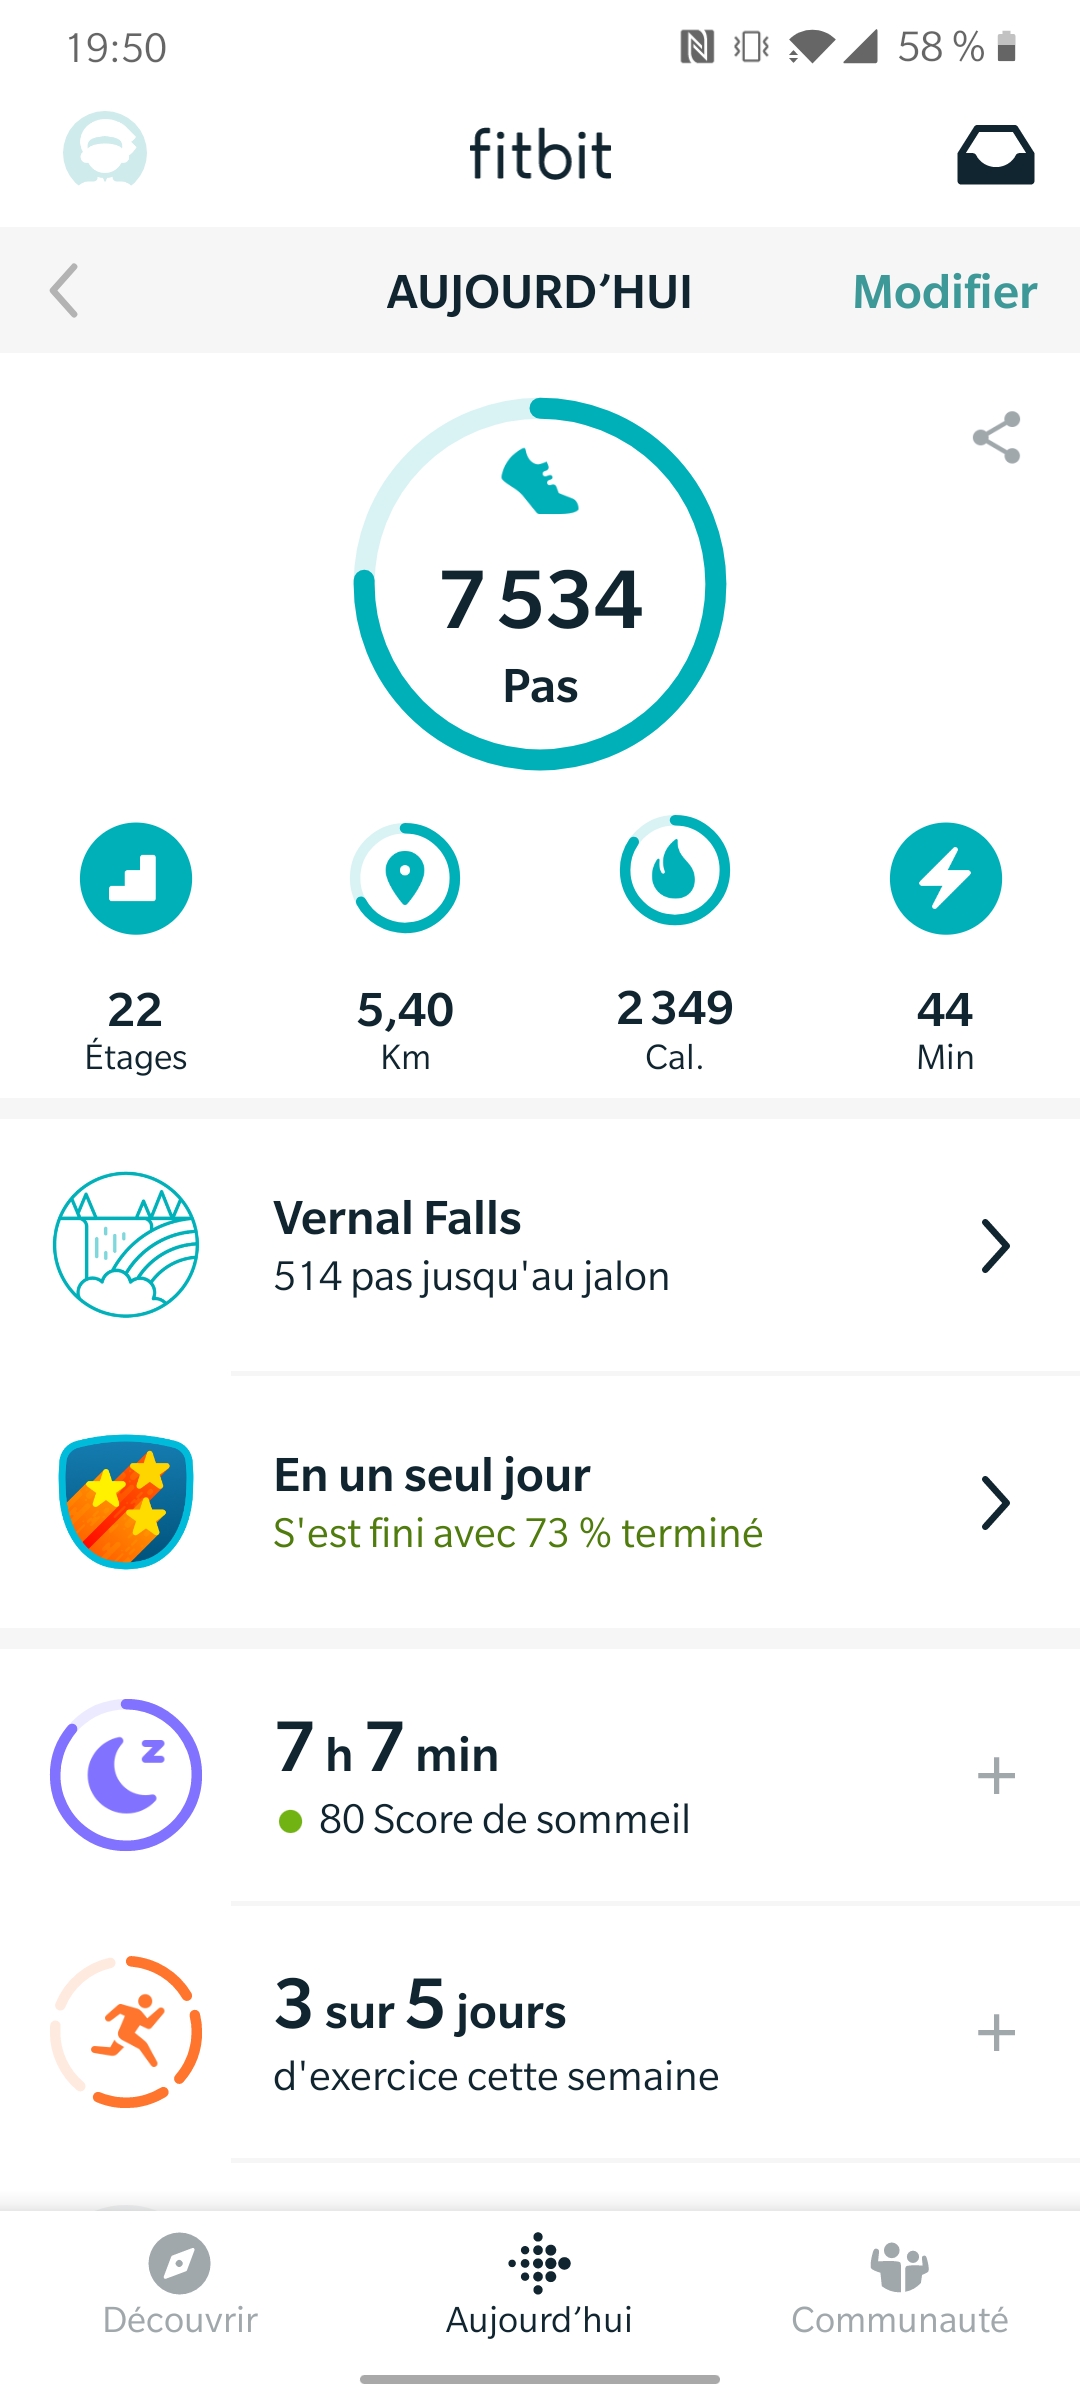 fitbit-application- (3)